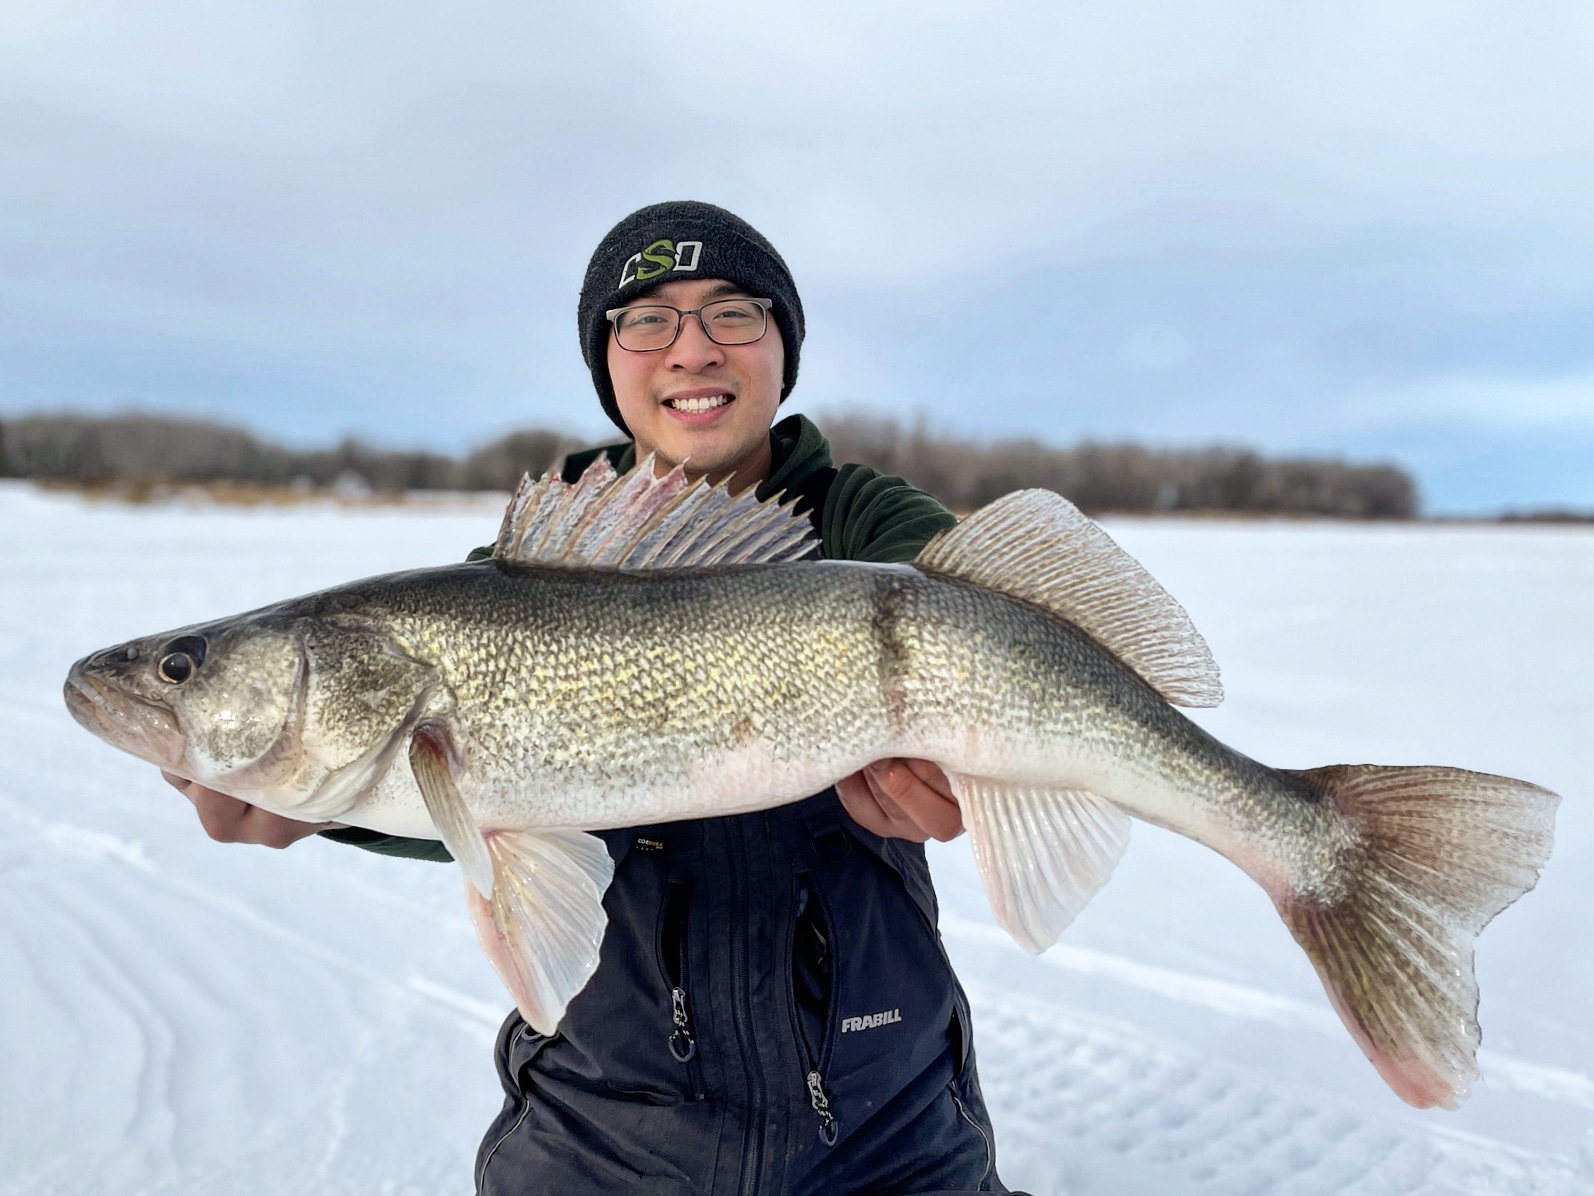 The Red River of the North: The Ice Fishing Guide – Fishing